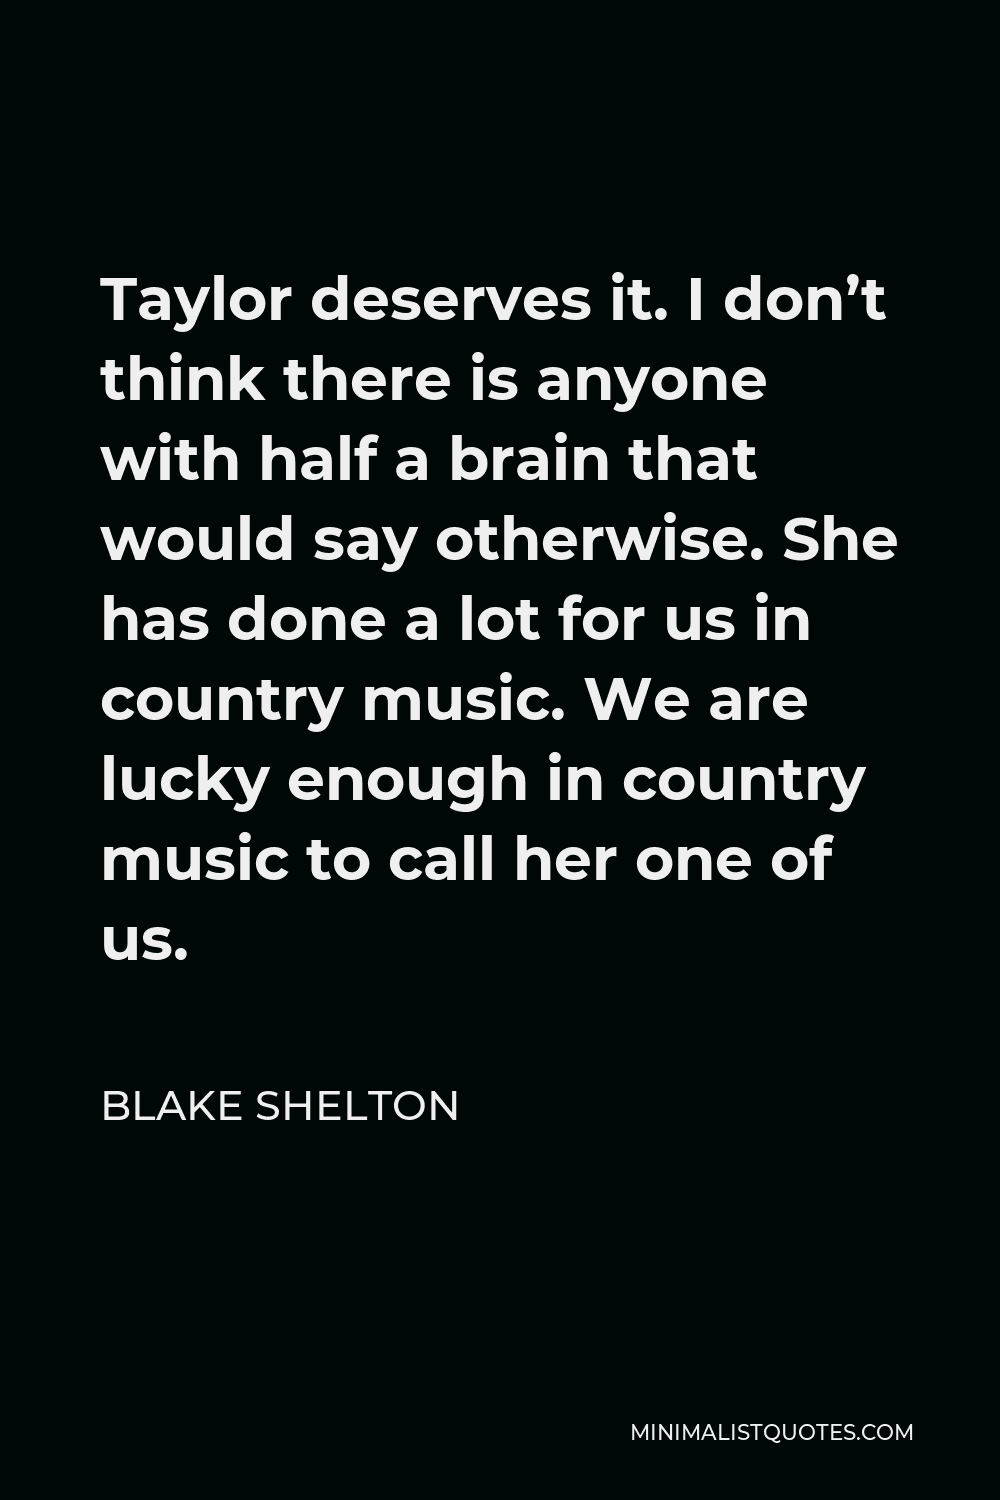 Blake Shelton Quote - Taylor deserves it. I don’t think there is anyone with half a brain that would say otherwise. She has done a lot for us in country music. We are lucky enough in country music to call her one of us.